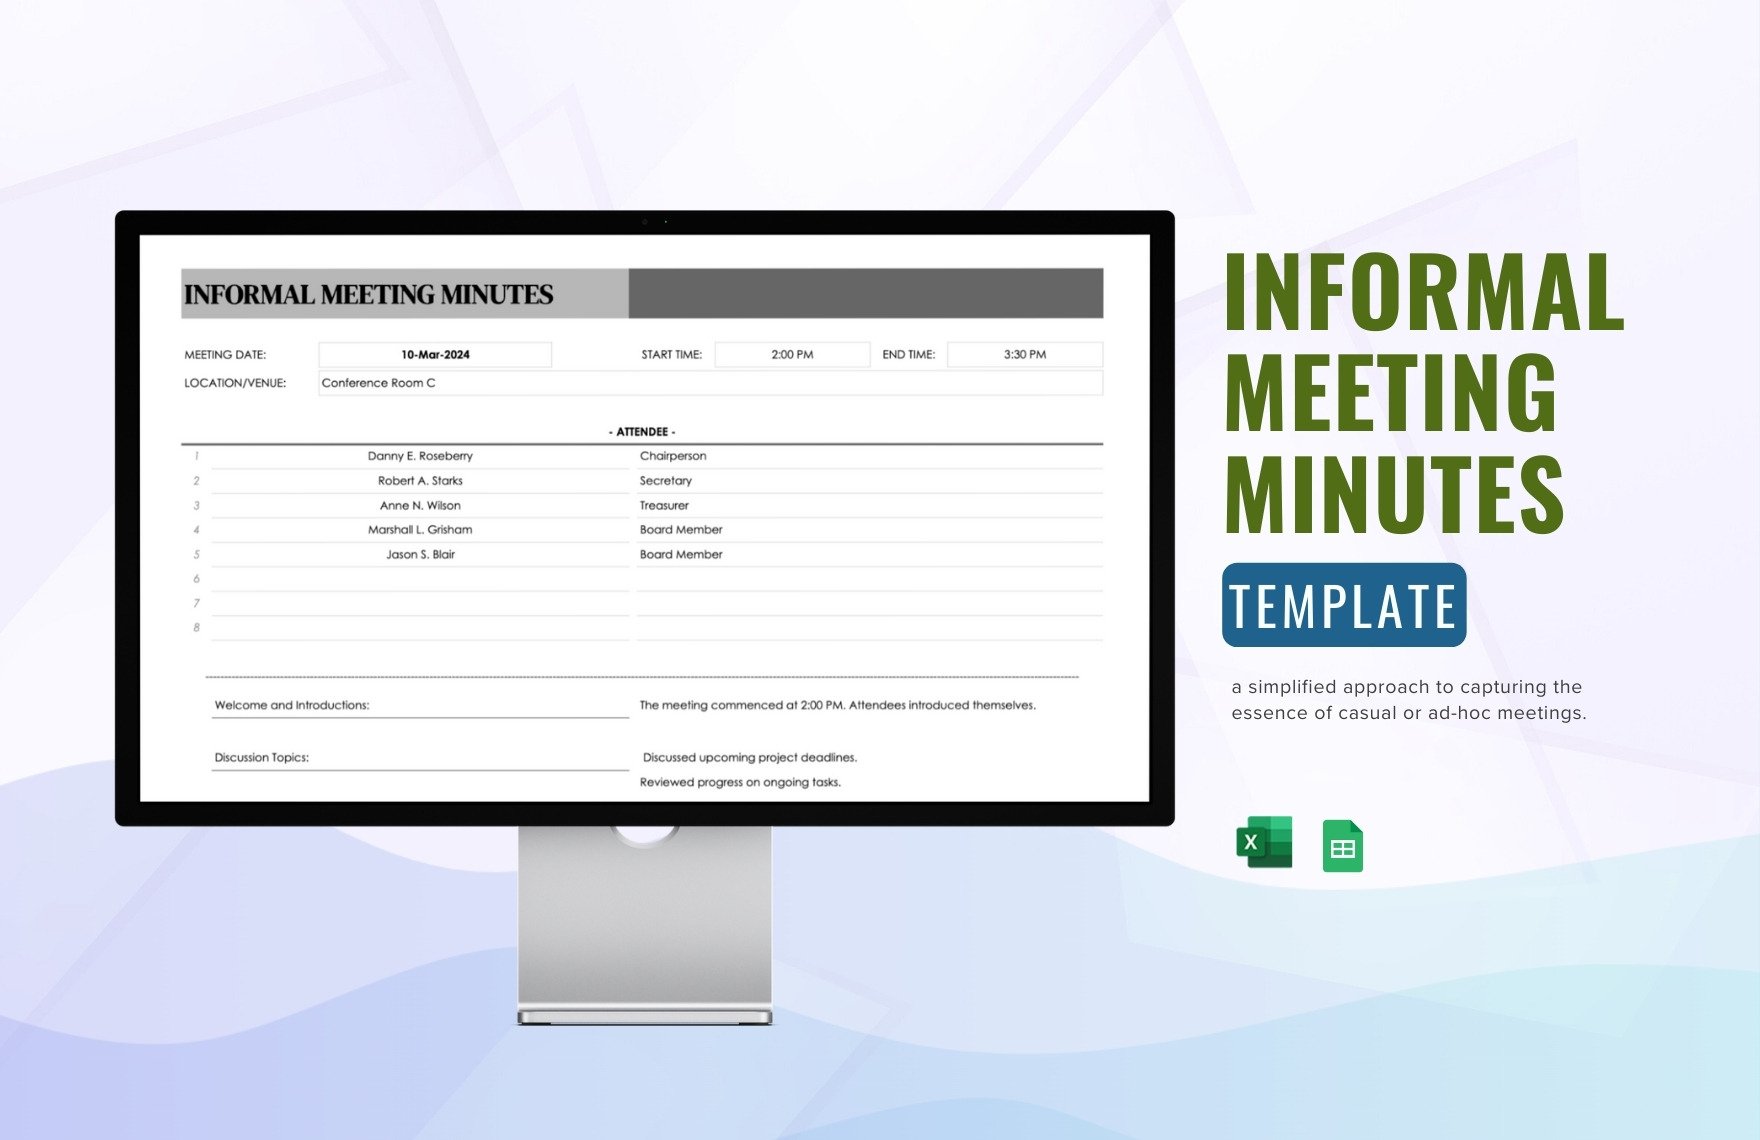 Informal Meeting Minutes Template in Excel, Google Sheets